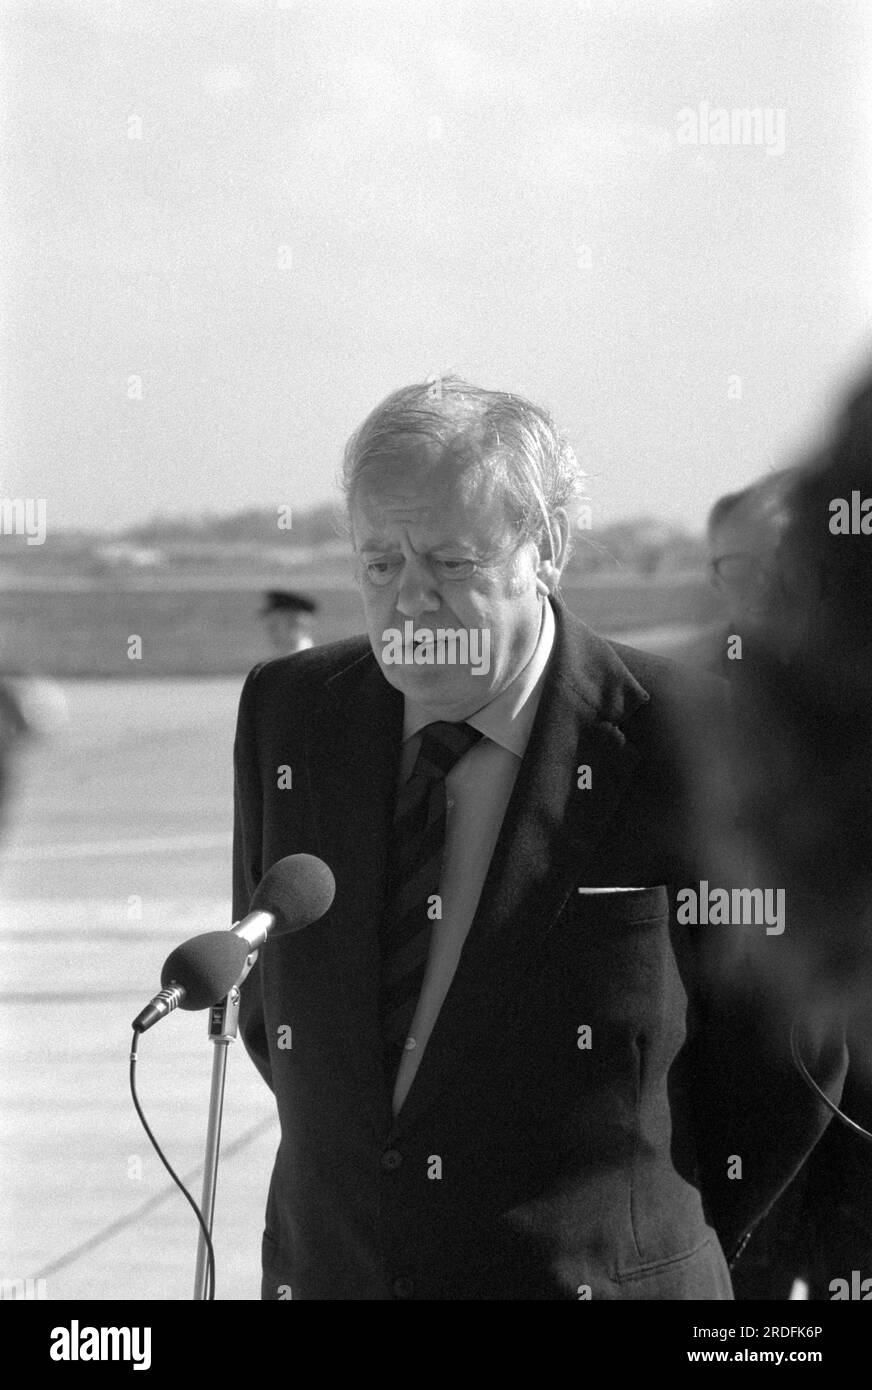 80-1723  LORD CHRISTOPHER SOAMES, former Governor of Southern Rhodesia.  19 April 1980 Heathrow Airport VIP area Stock Photo